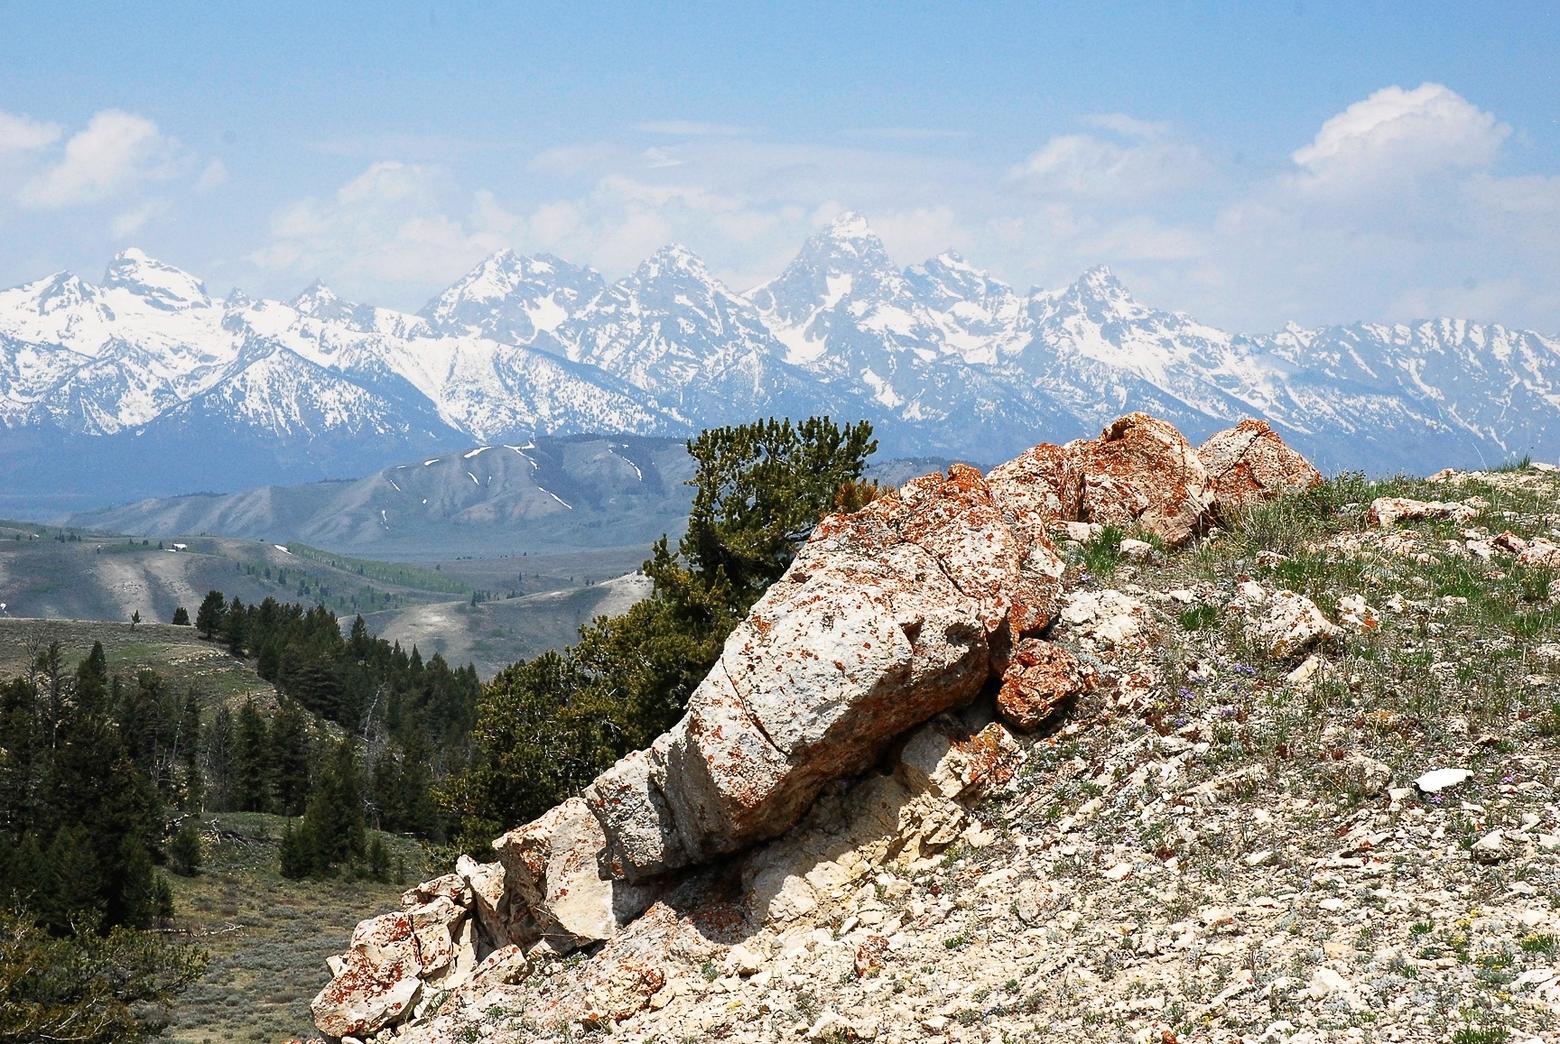 Eye of the beholder: The writer's view of the Teton Range from the sandstone rim on “Magic Ridge.” Photo by Susan Marsh